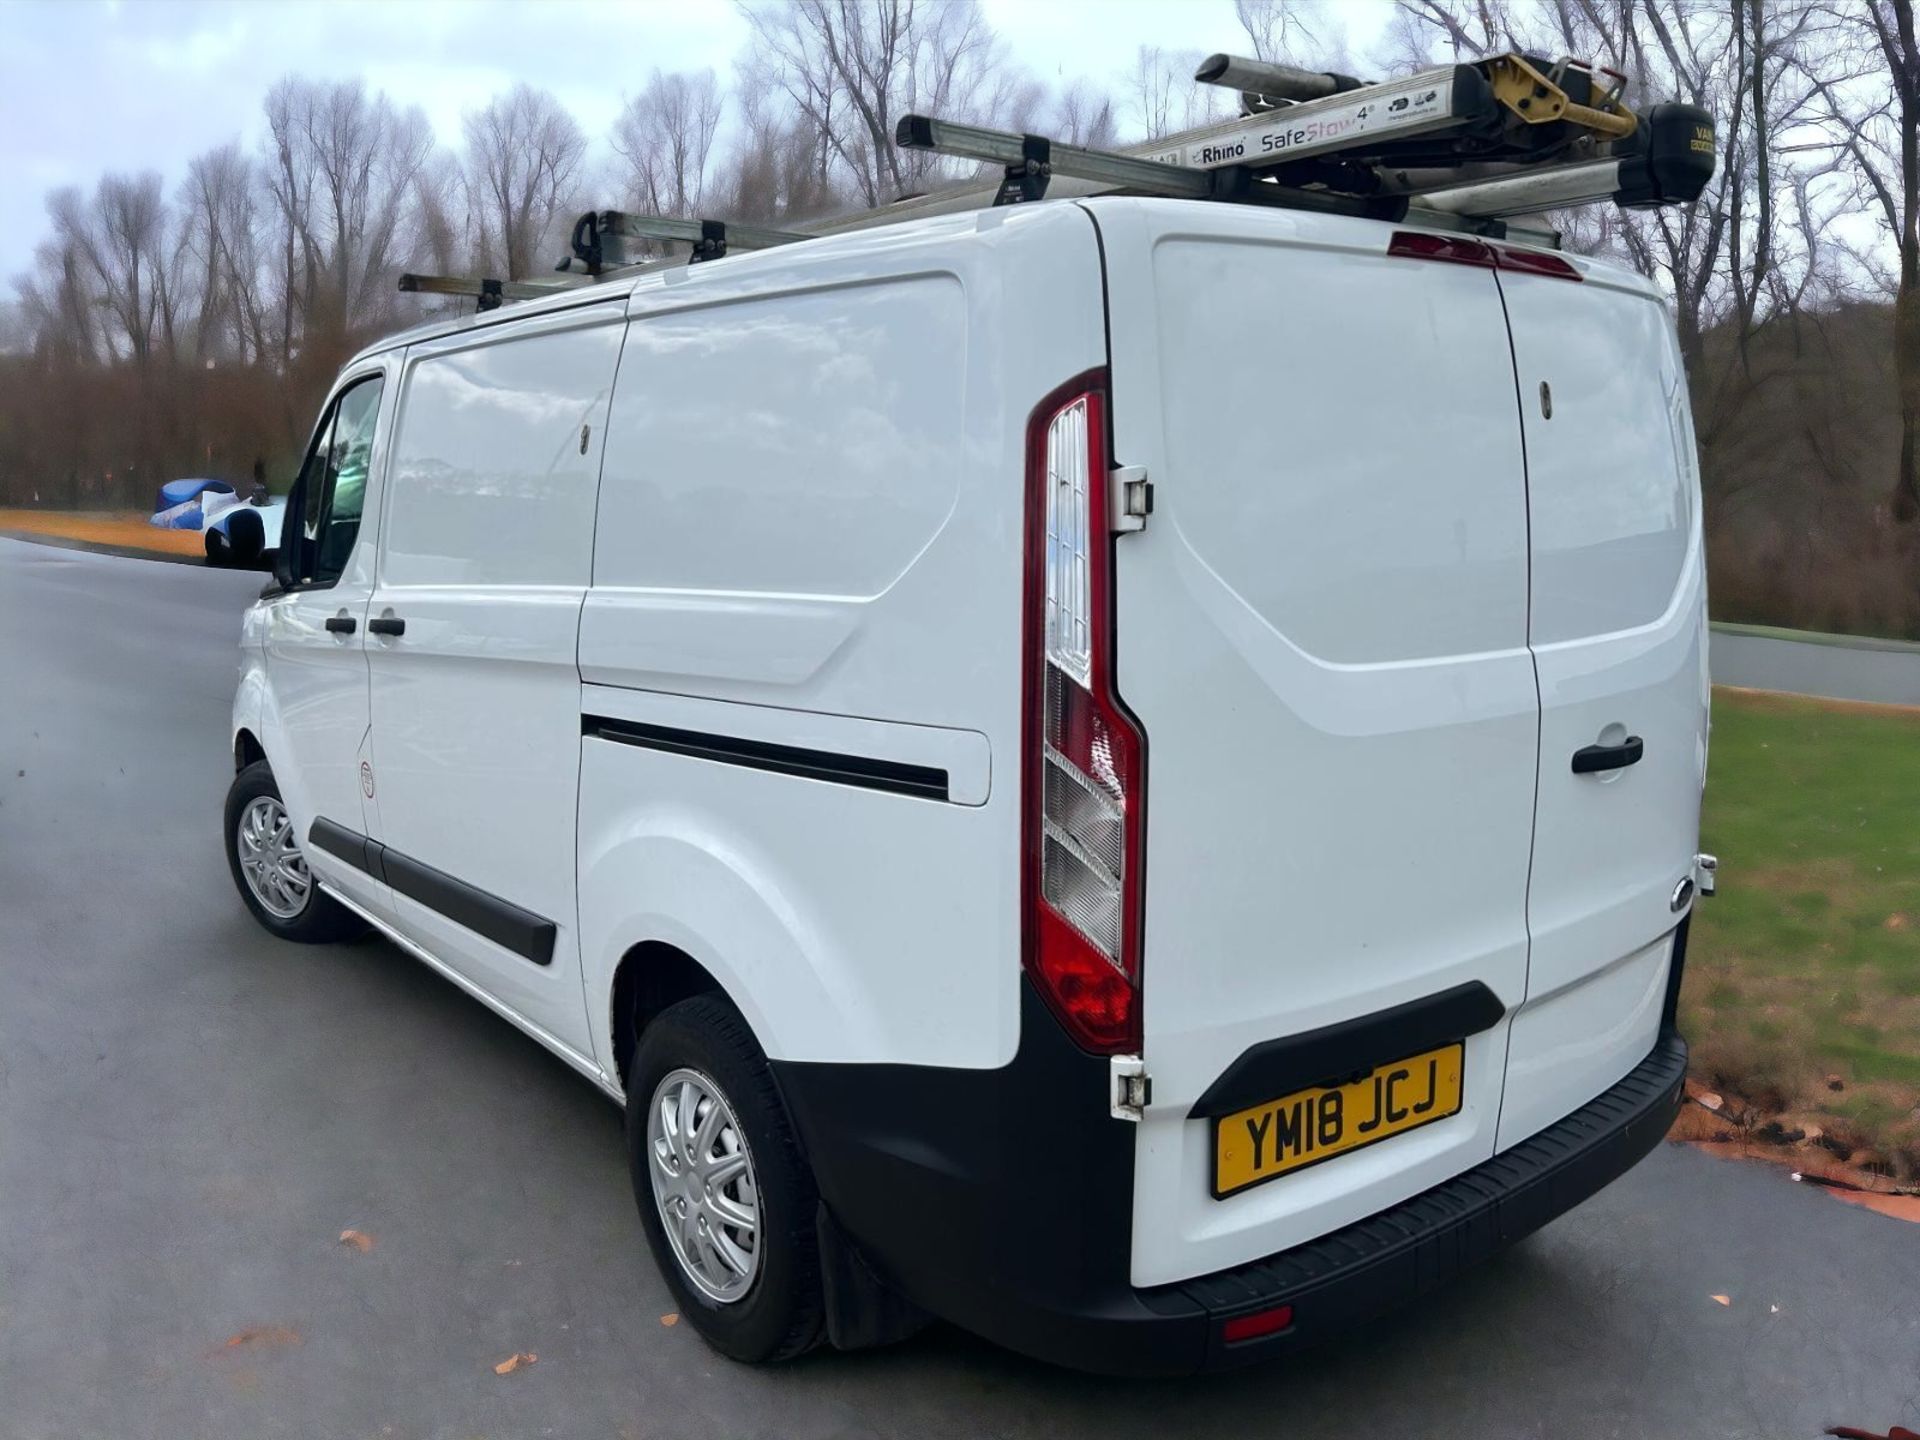 2018-18 REG FORD TRANSIT CUSTOM 280 SWB L1H1- HPI CLEAR - READY FOR ACTION ! - Image 6 of 15